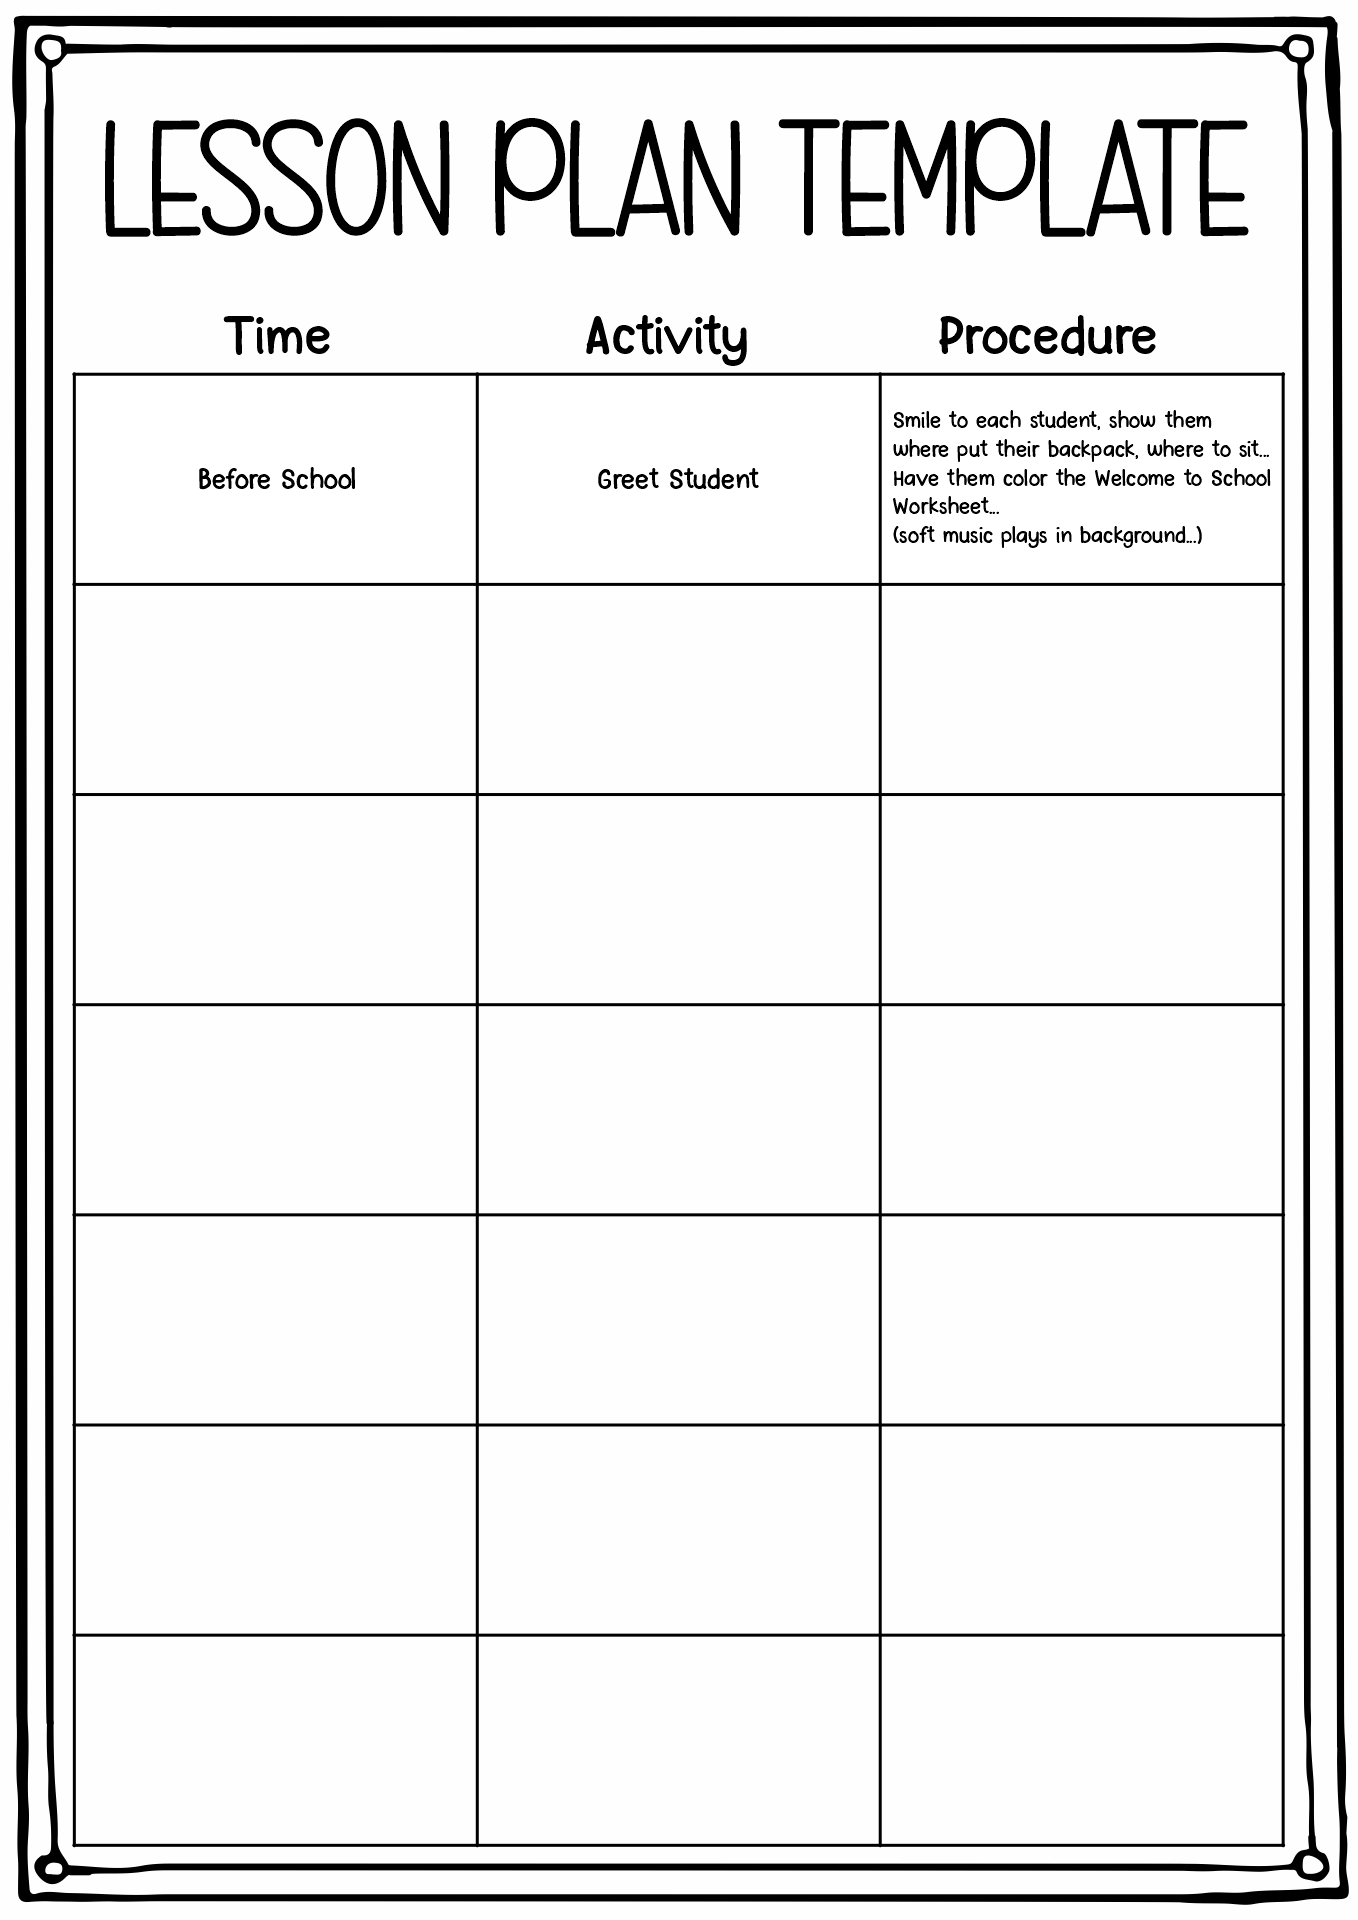 First Day of School Lesson Plans Image